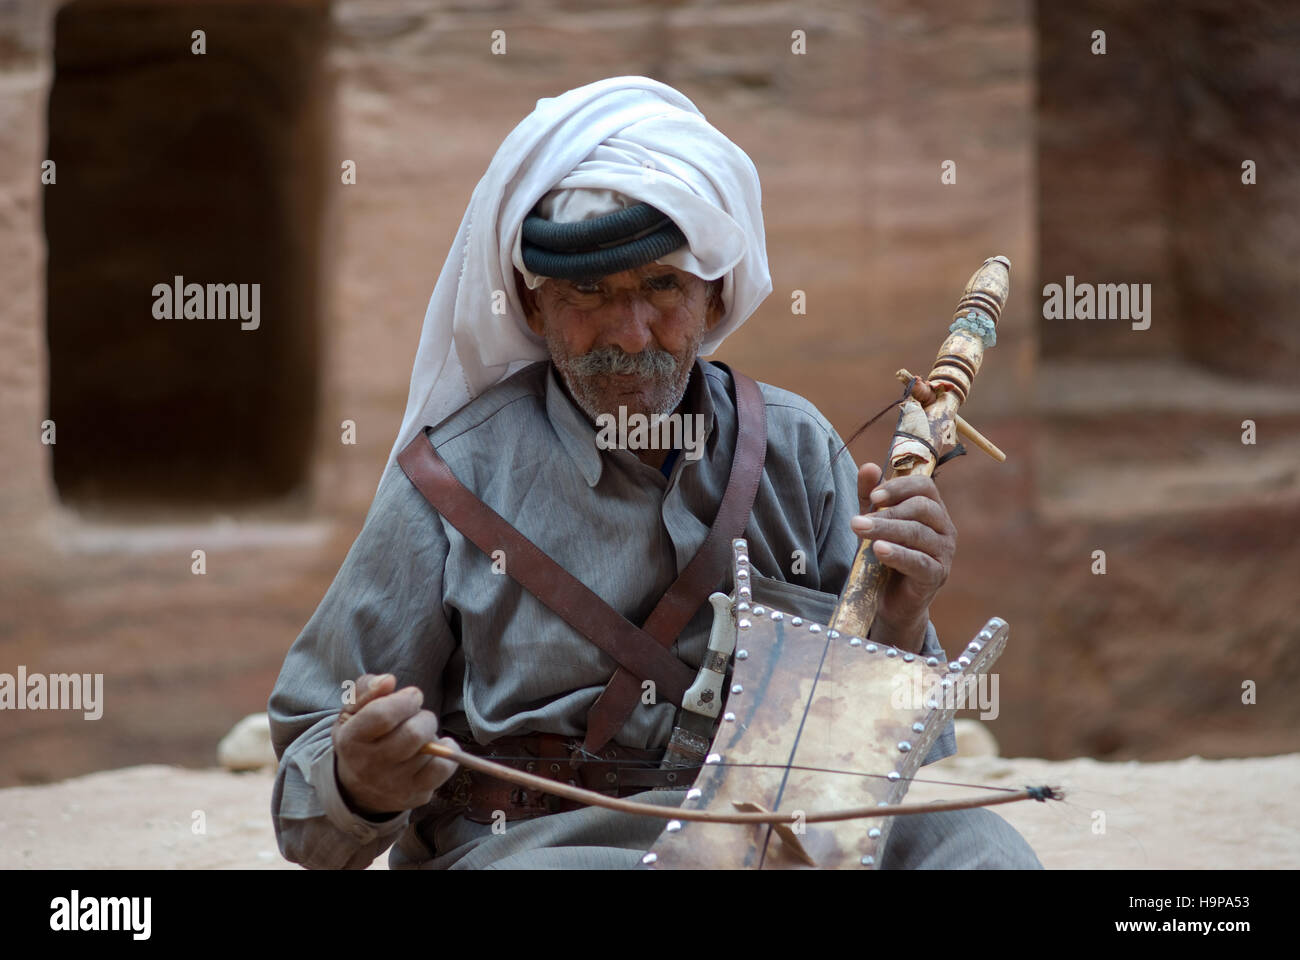 Bedouin senior man playing stringed instrument at the ancient site of Petra in Jordan Stock Photo